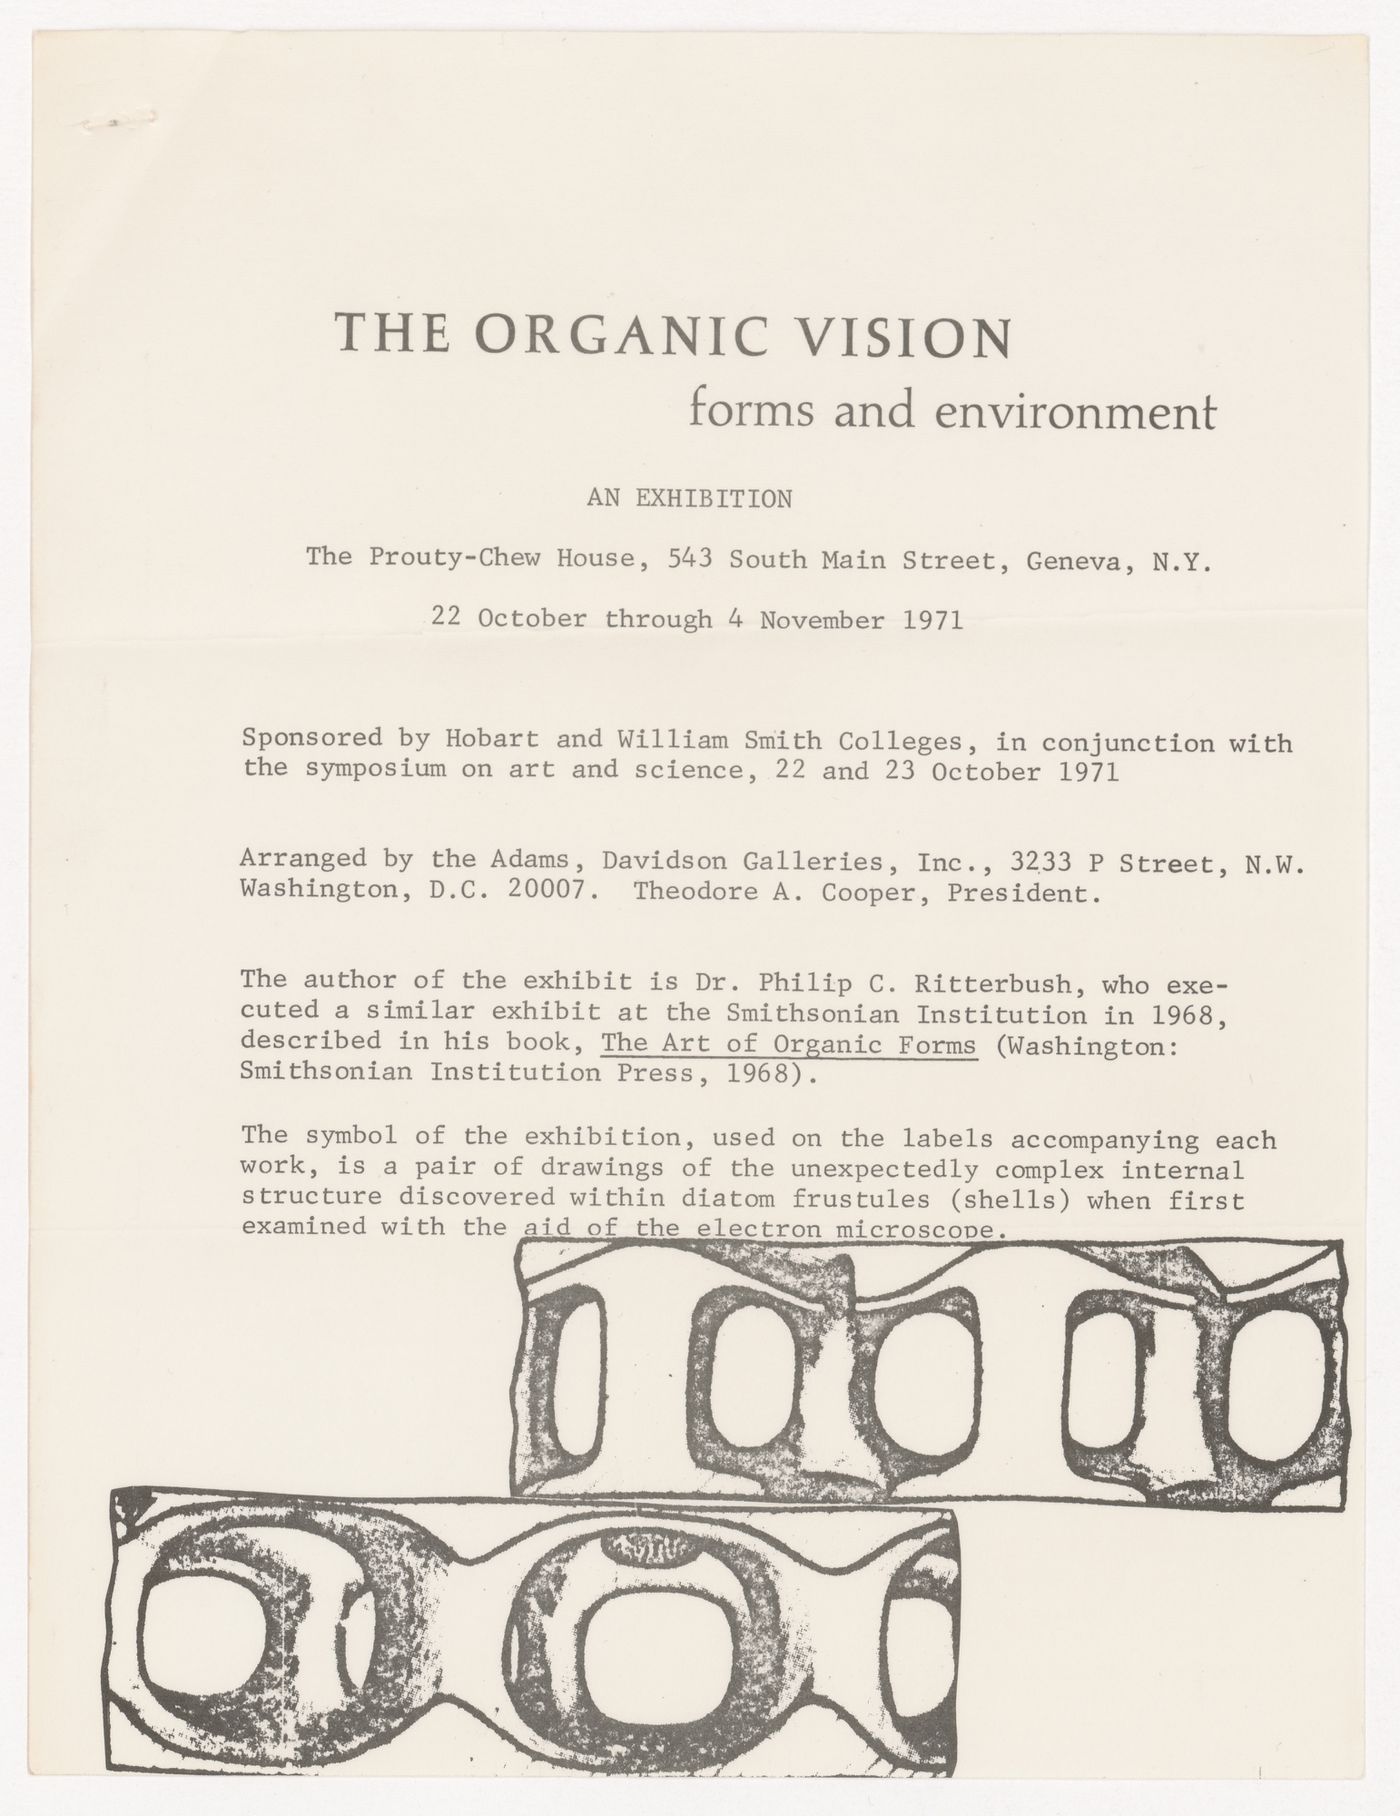 Text relating to the exhibition "The Organic Vision: forms and environment"